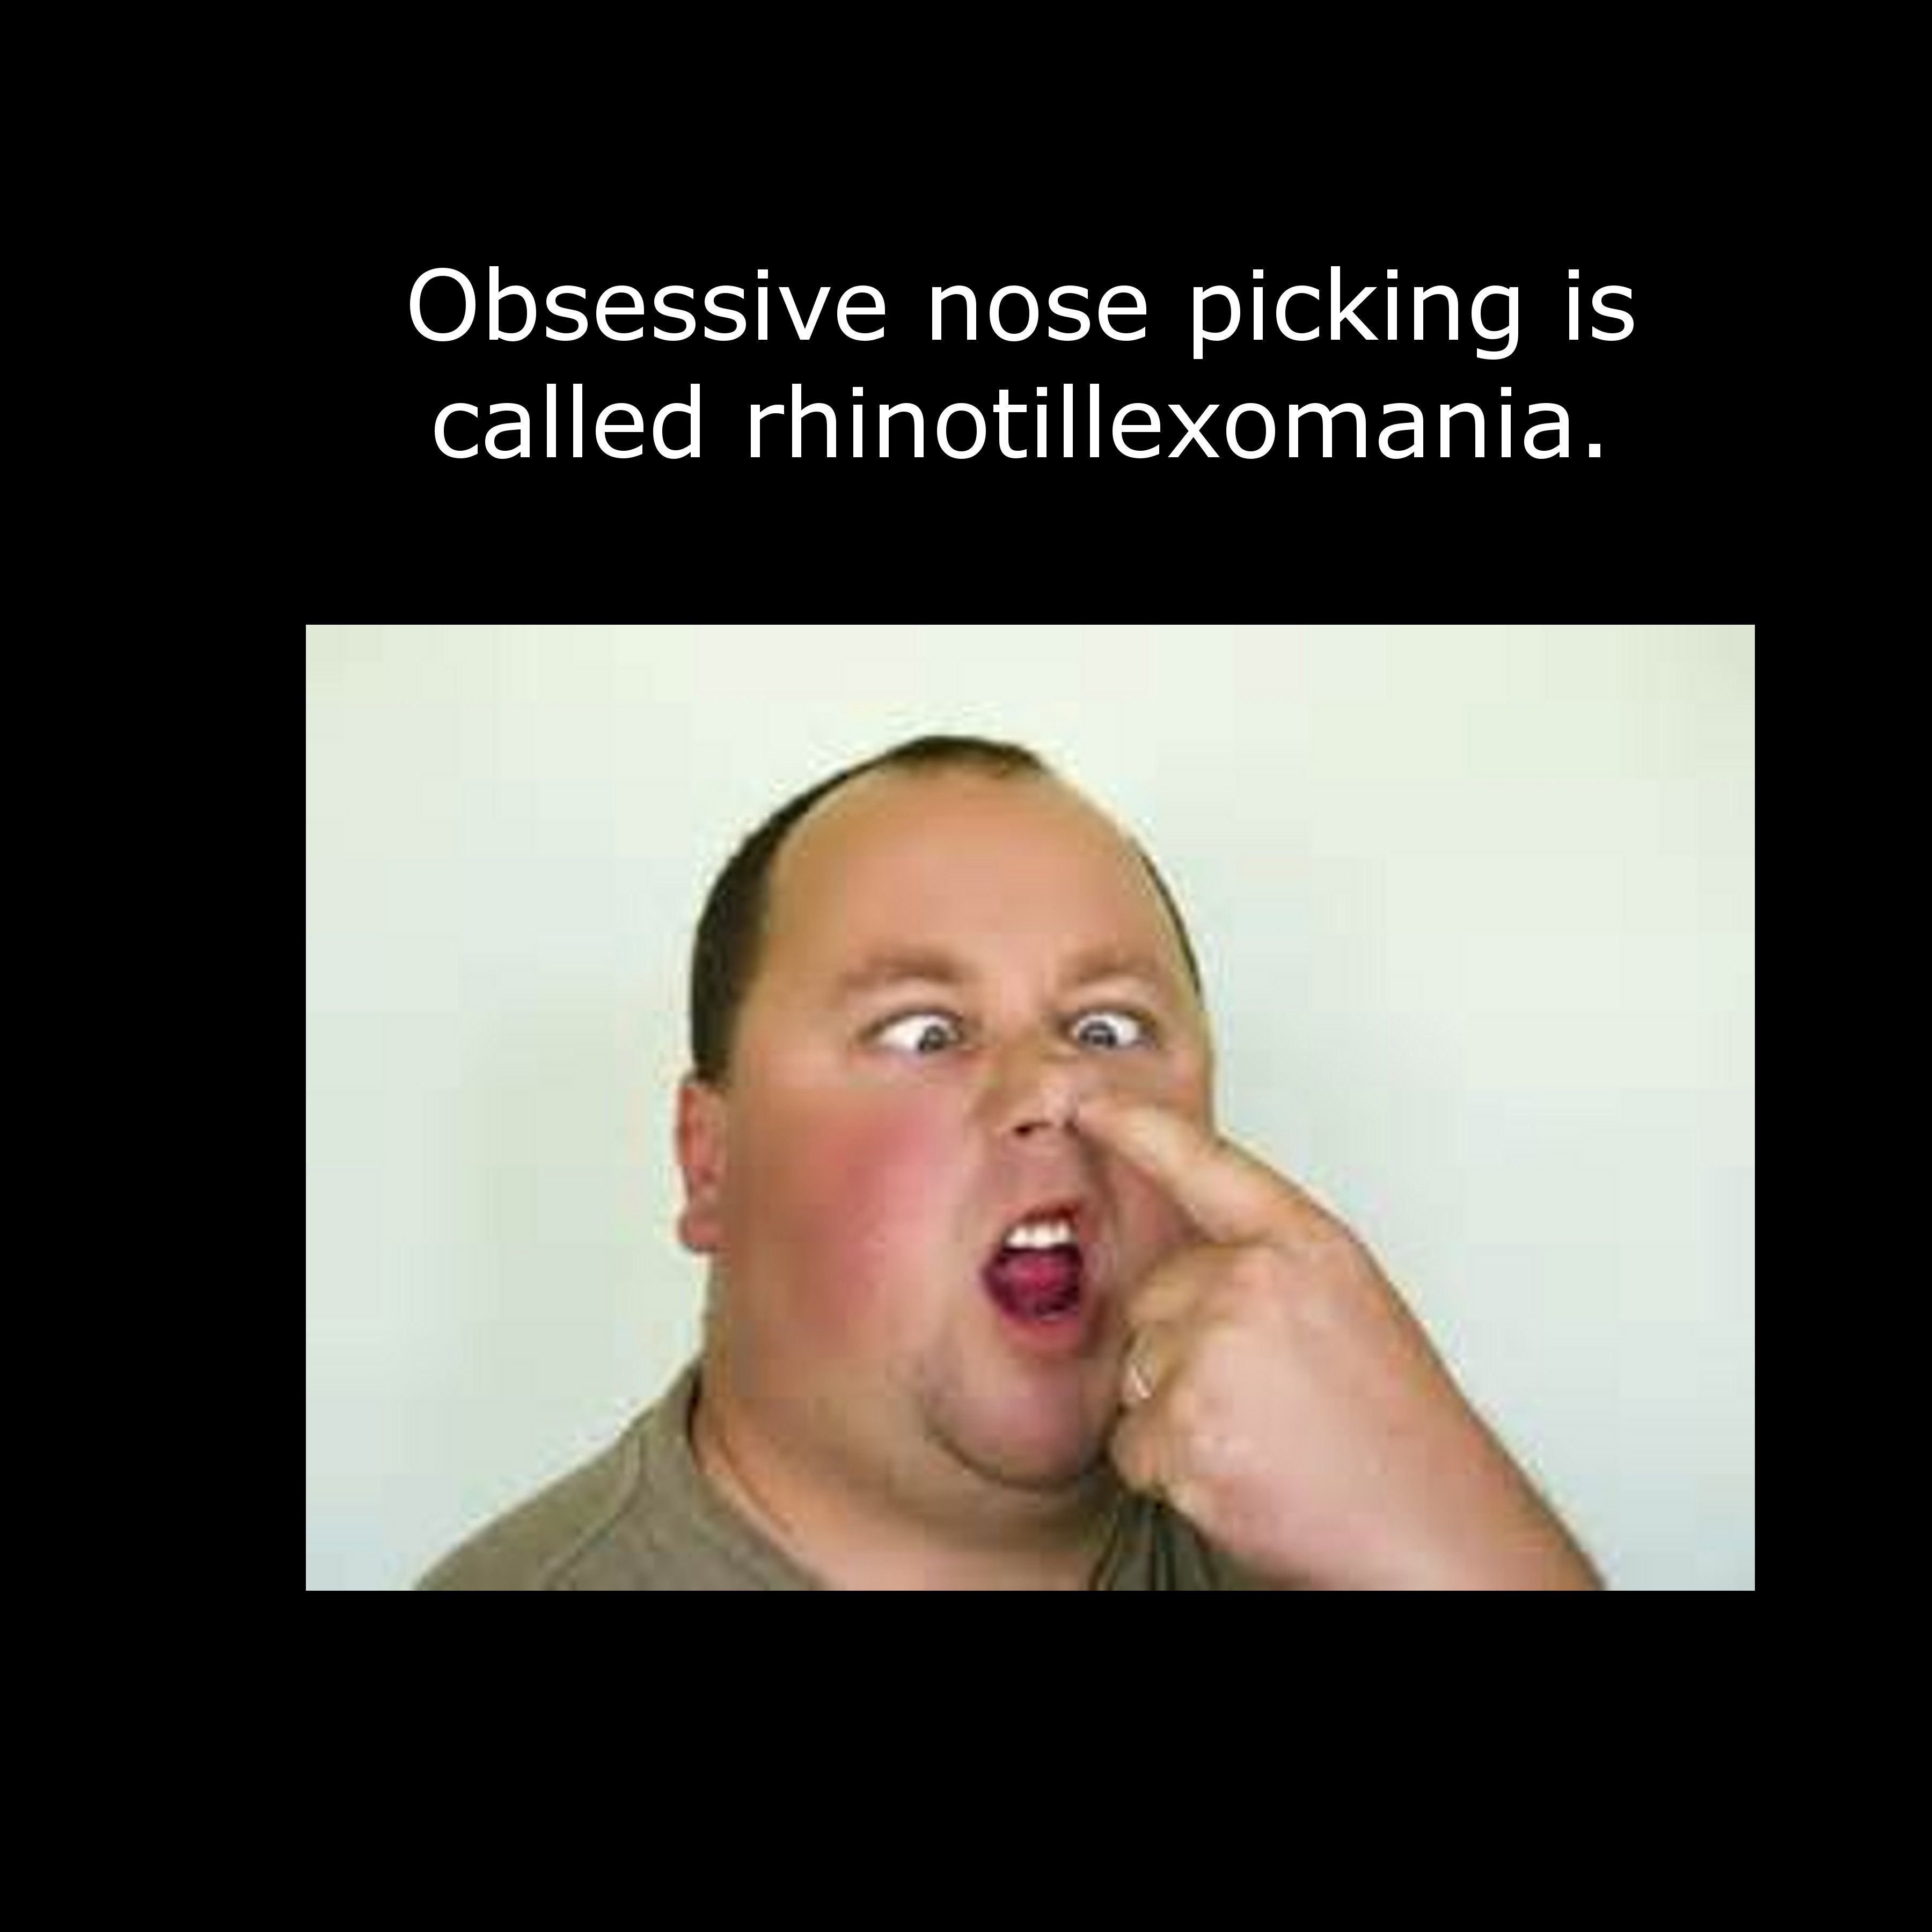 old people picking their nose - Obsessive nose picking is called rhinotillexomania.